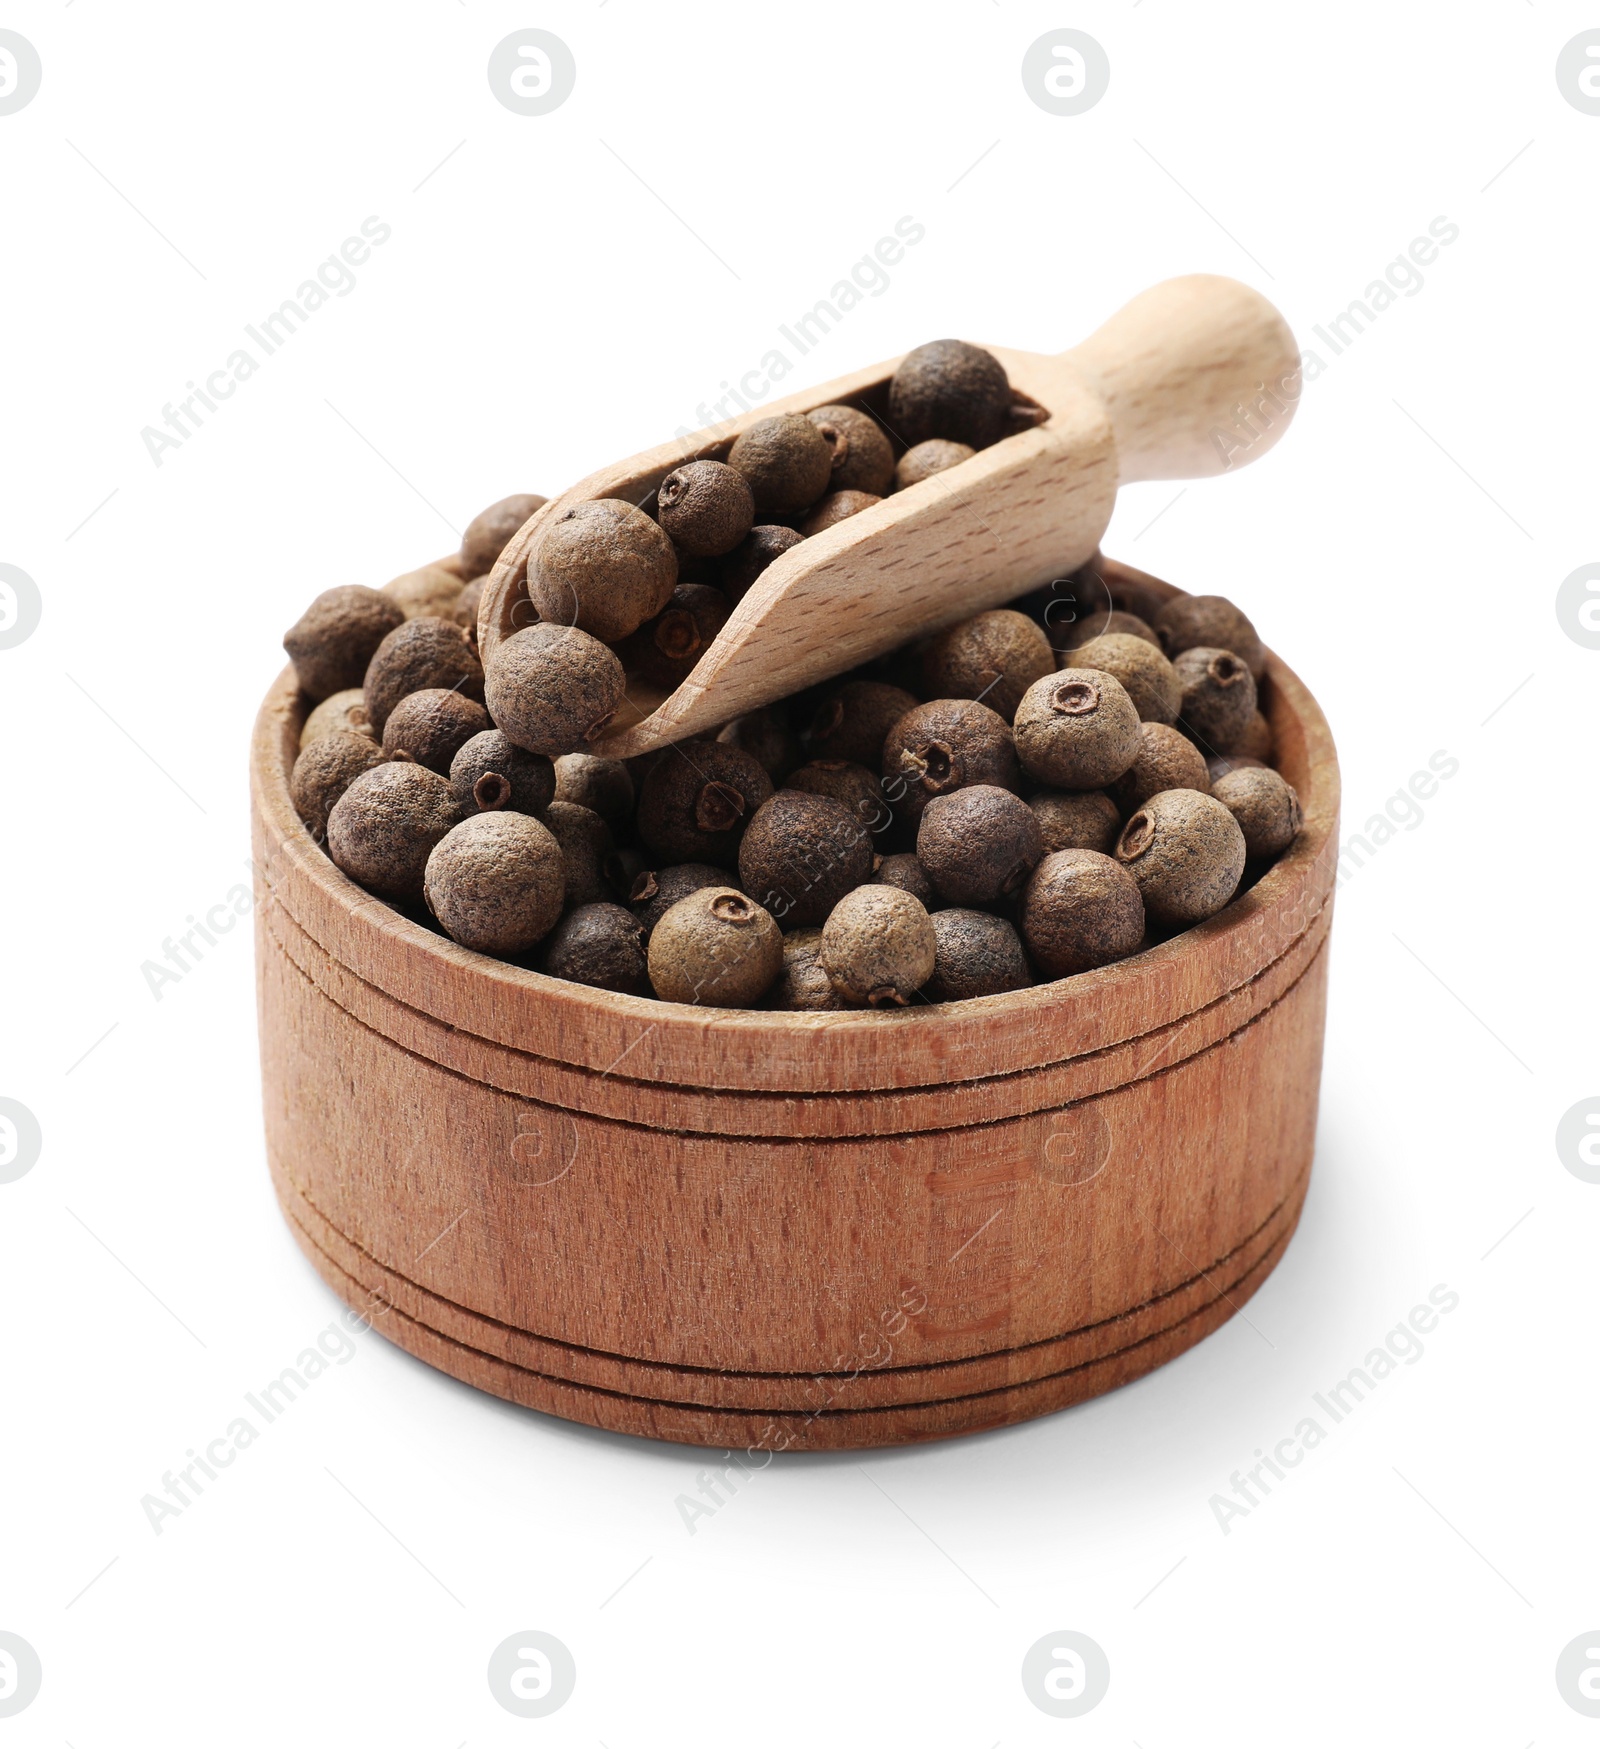 Photo of Dry allspice berries (Jamaica pepper) in bowl and scoop isolated on white